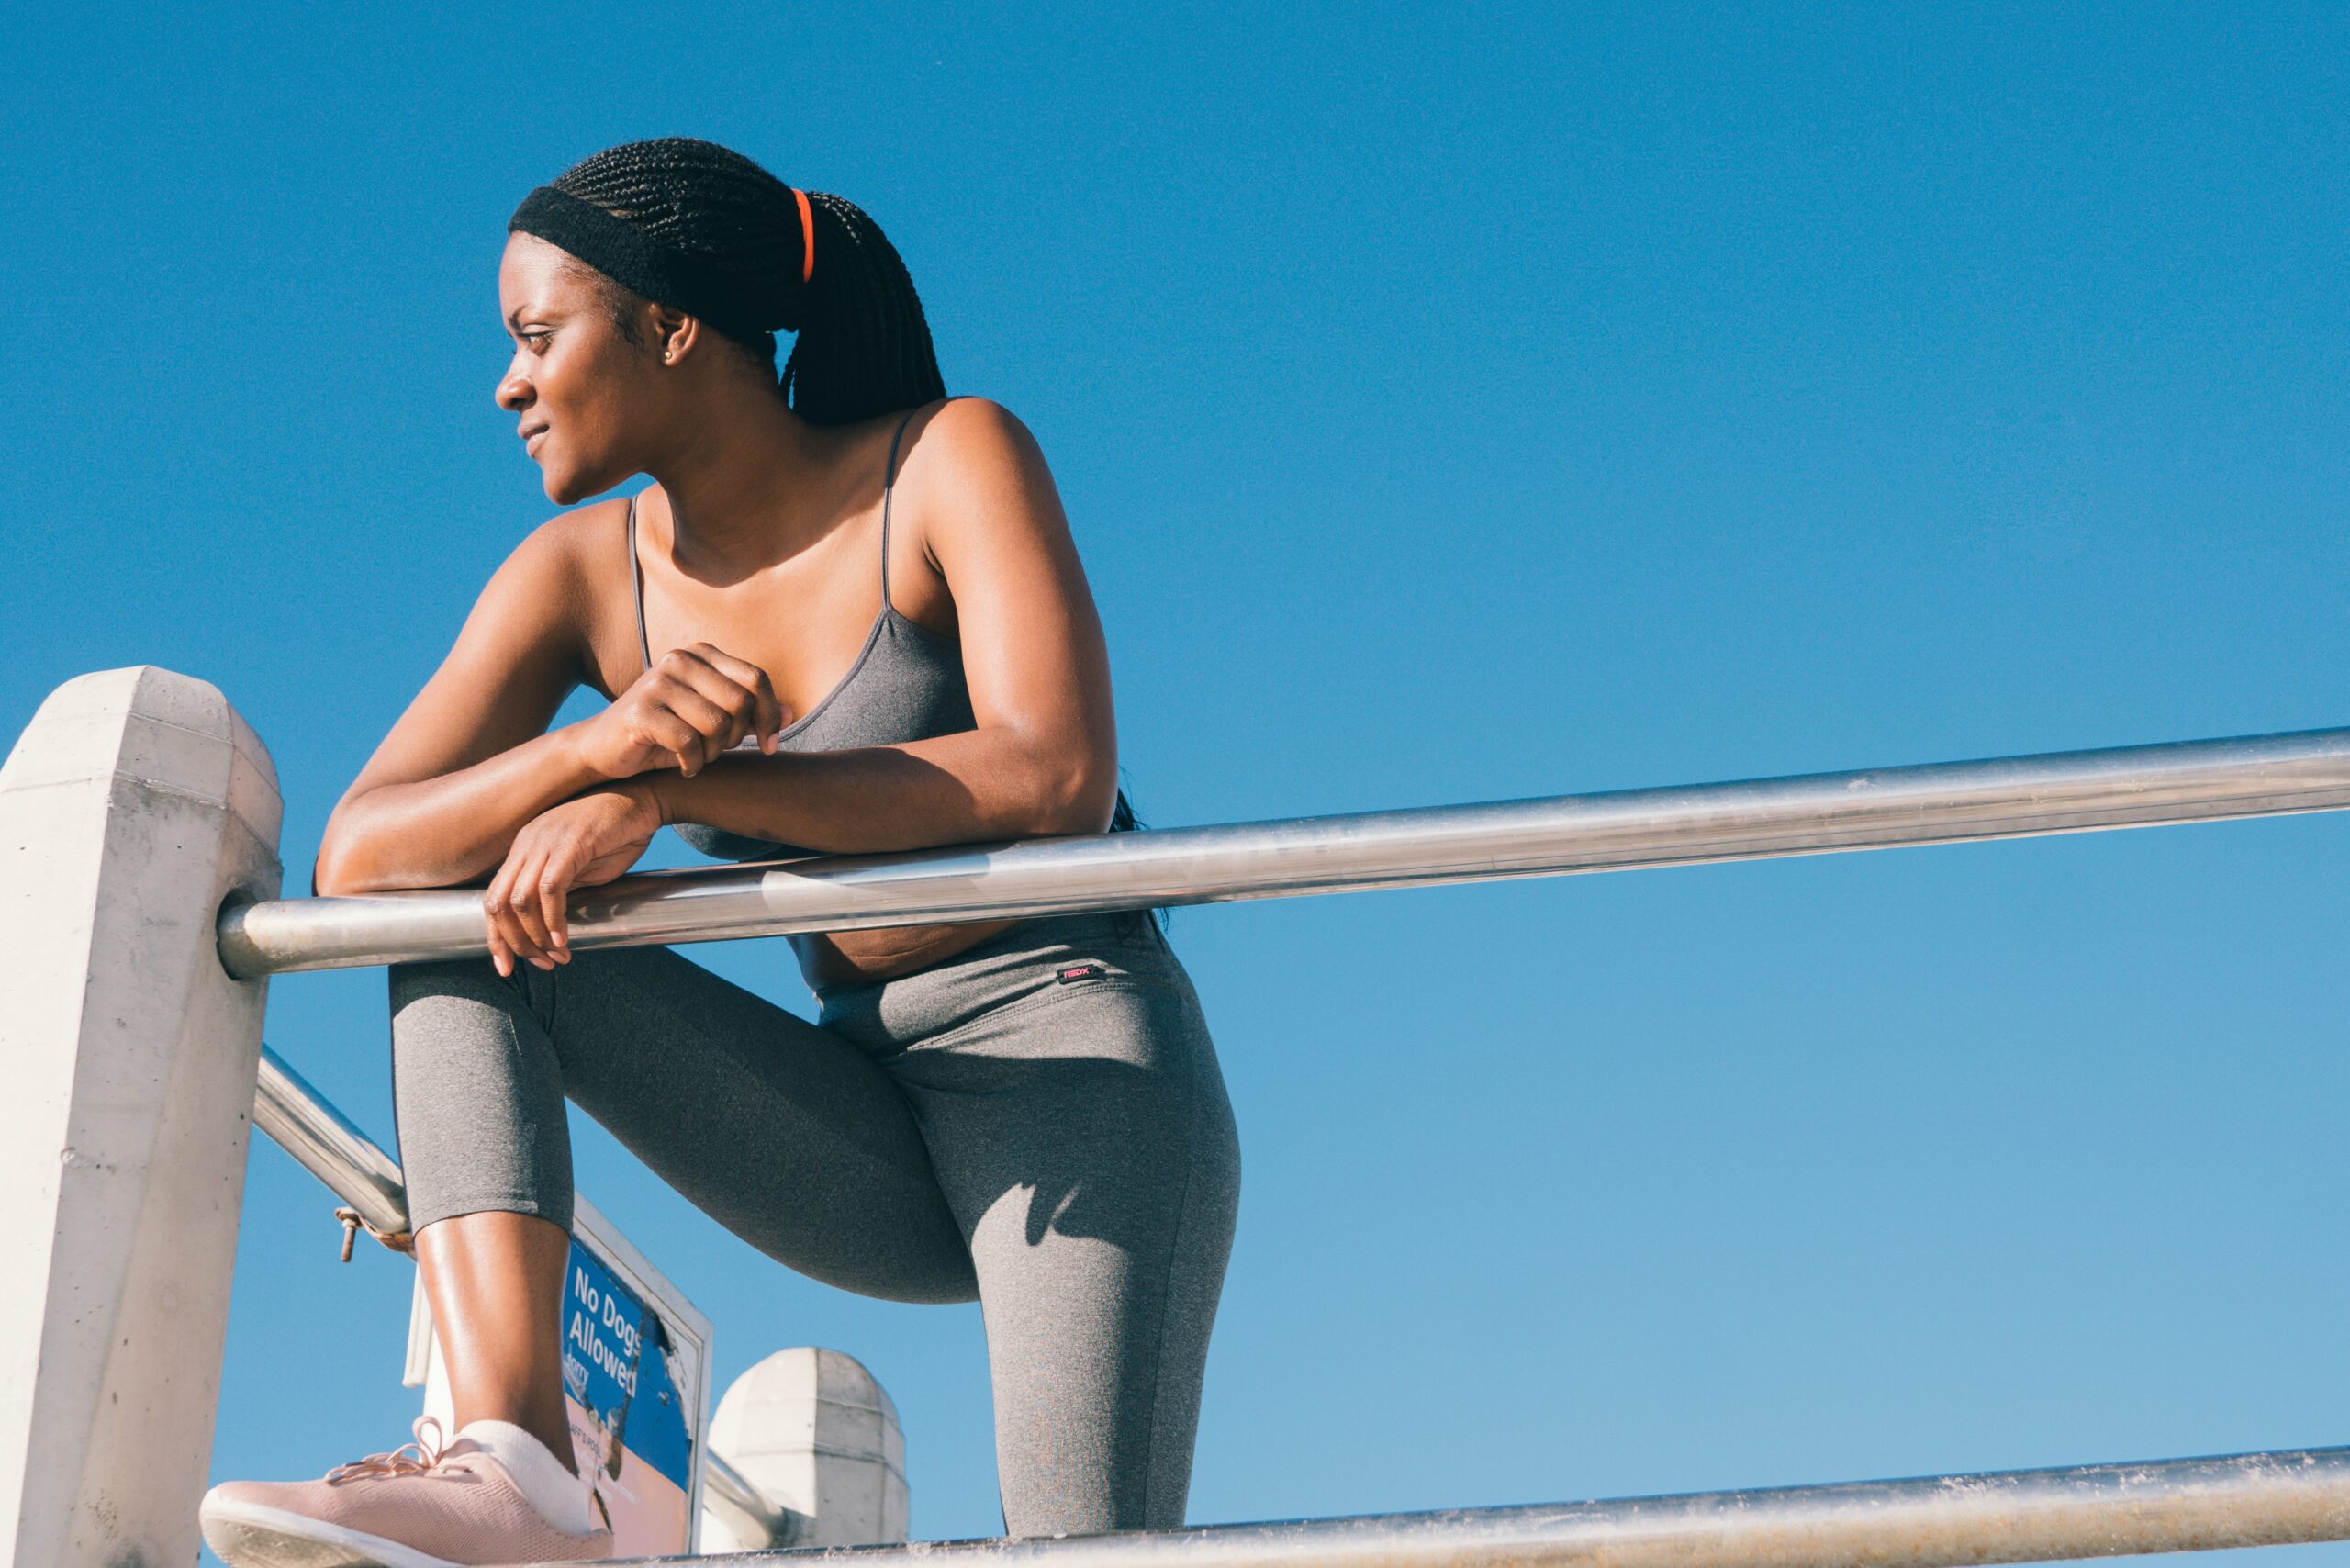 Image of a woman in gym clothing, leaning on a fence as though she has just been for a run